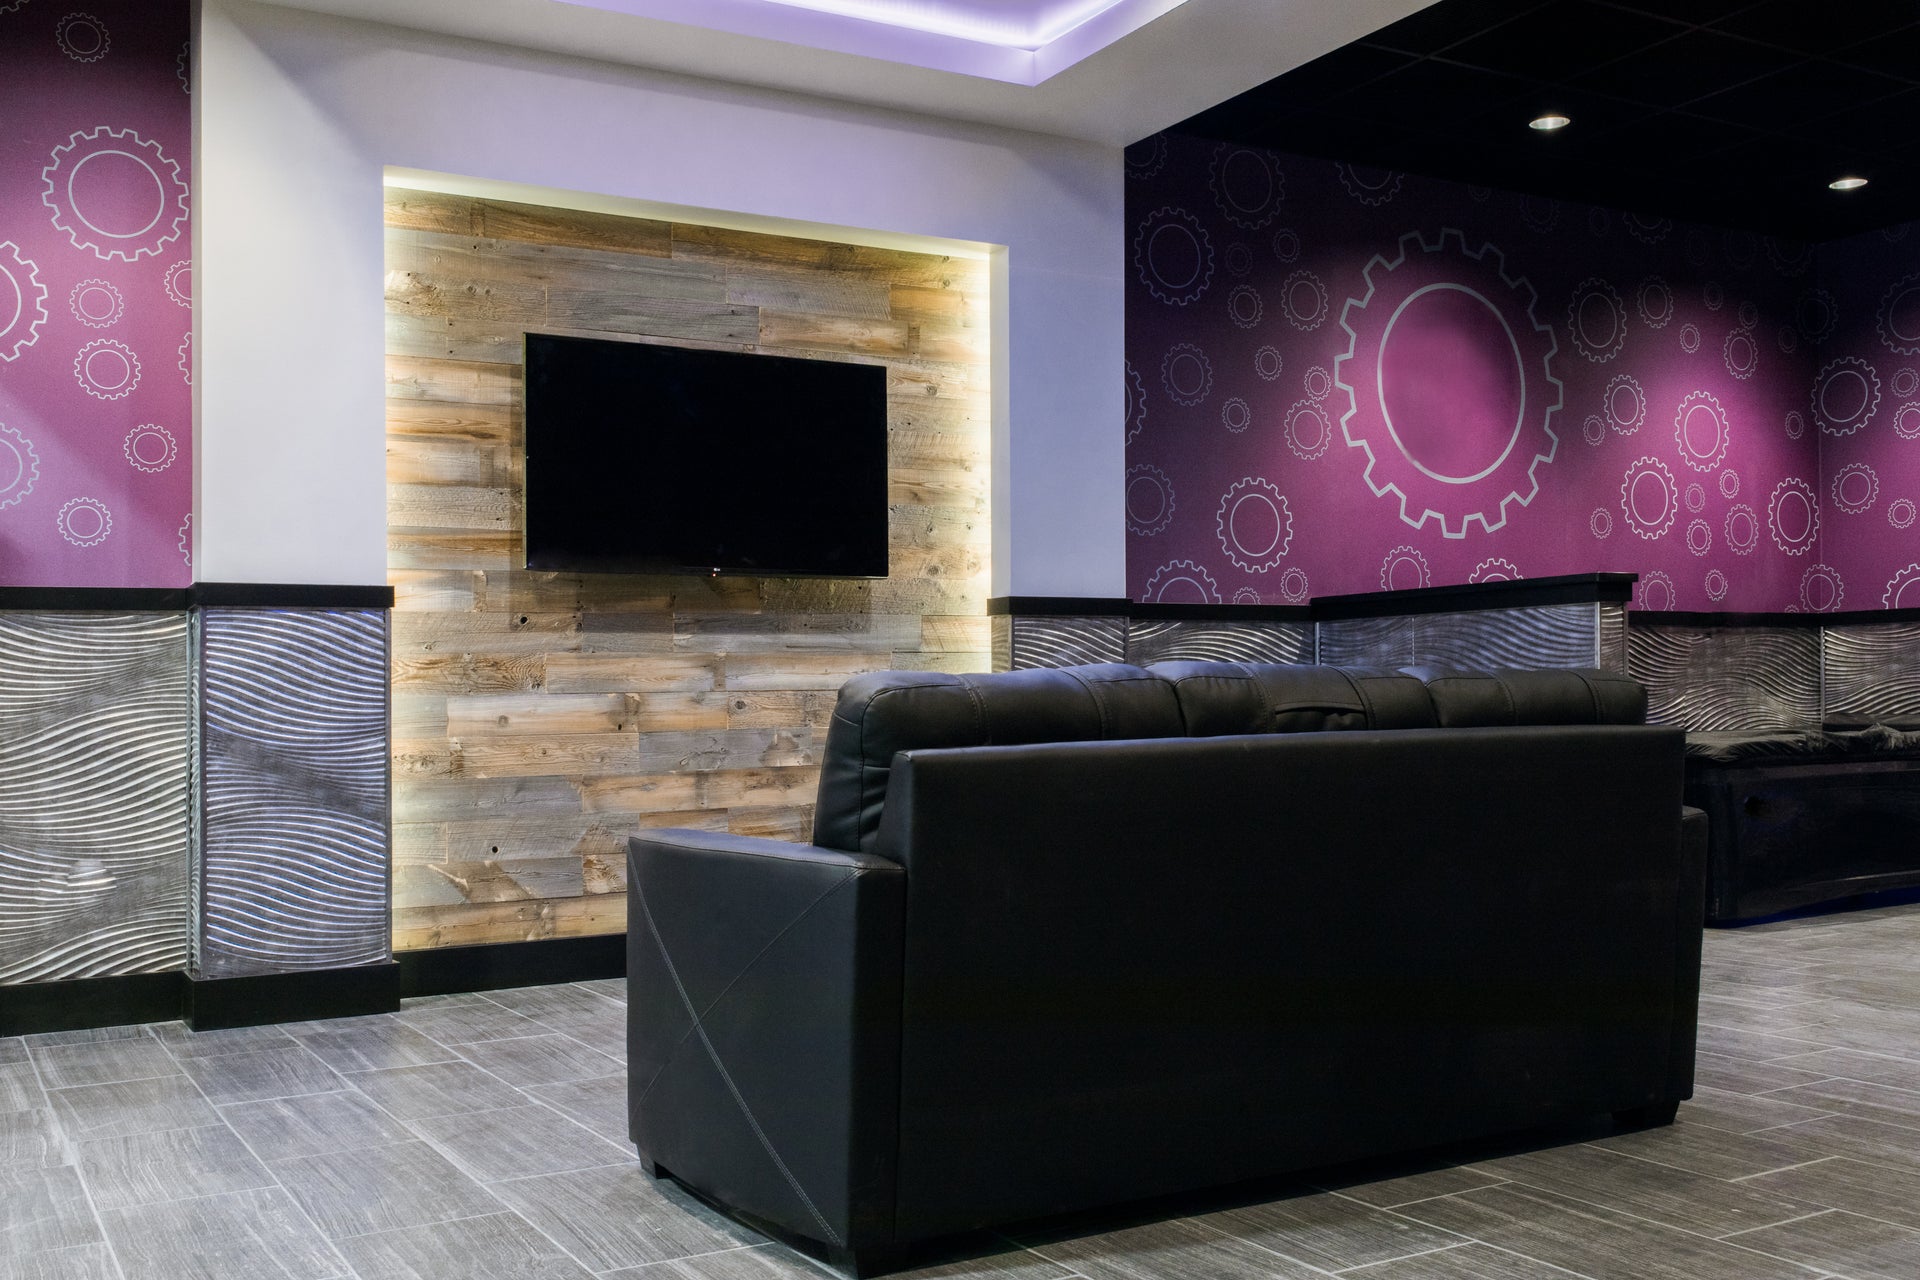 Reclaimed wood feature wall in a Planet Fitness in the Cheyenne finish from Centennial Woods 